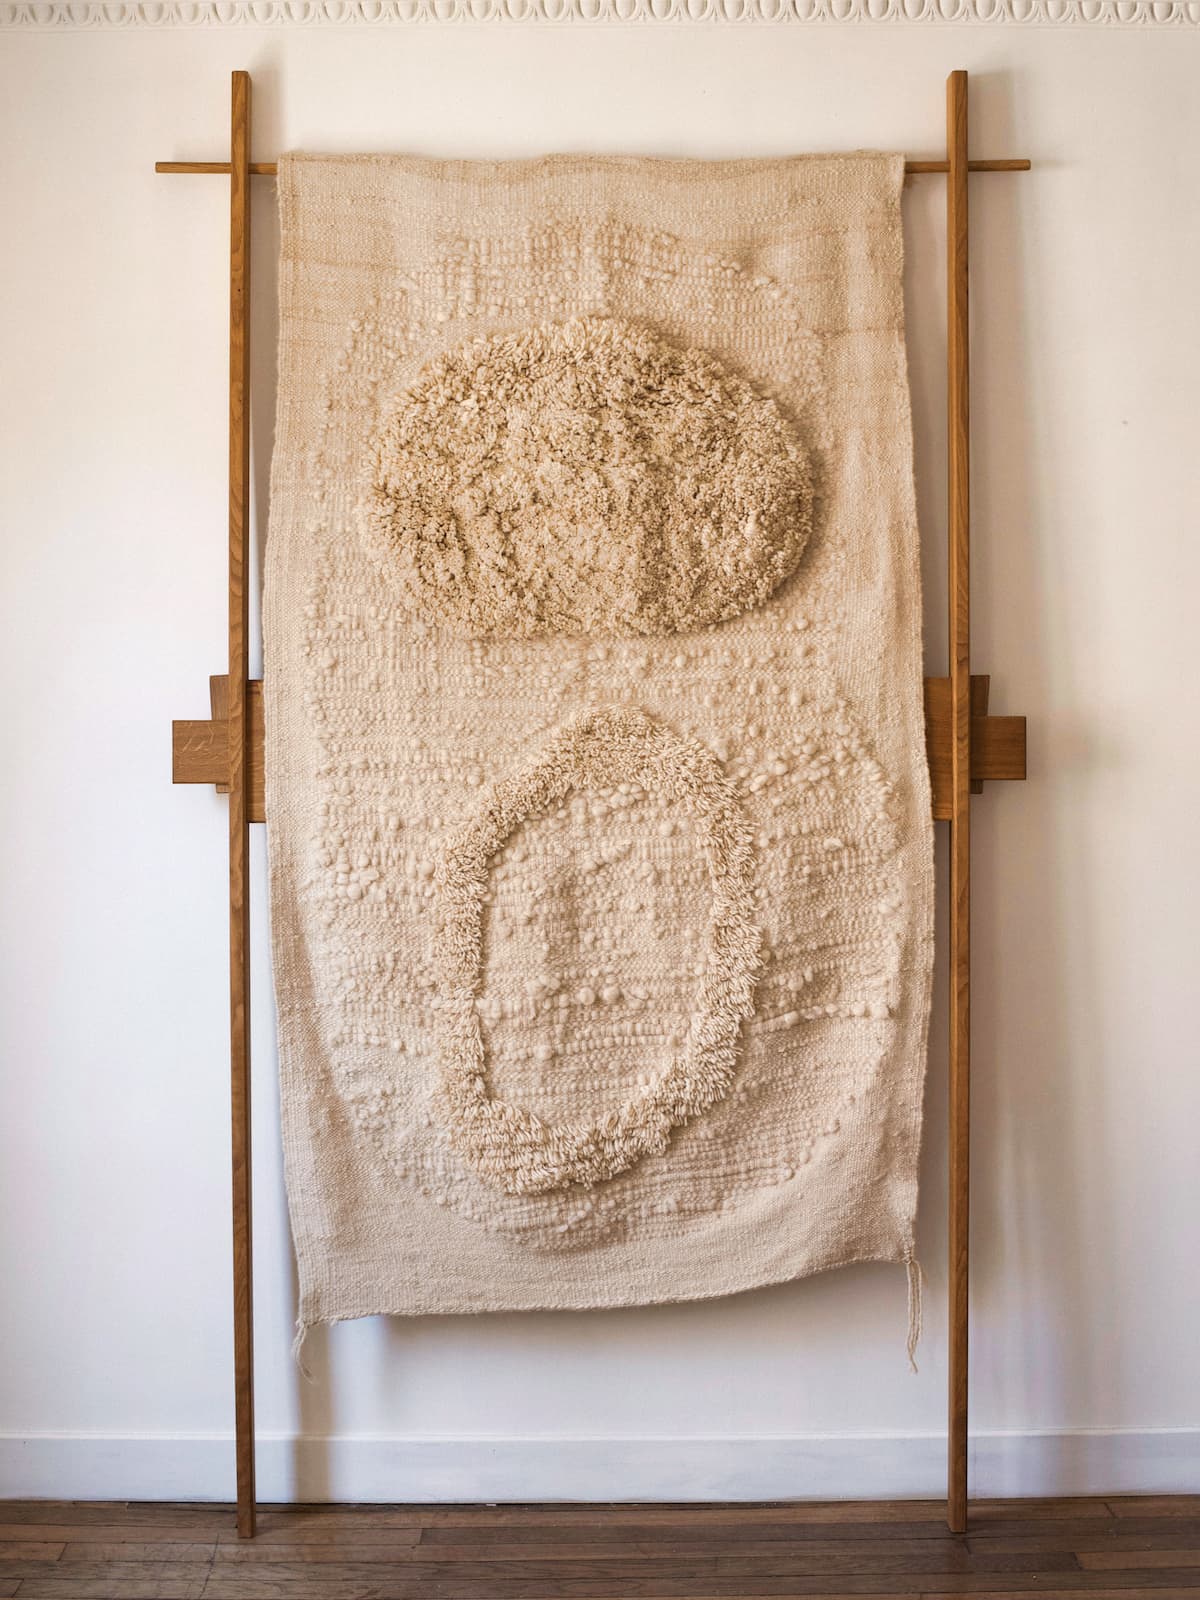 - Hand-spun and hand-woven wool tapestry 
- 2020
Dimensions: 
250 H x 145 W CM
98.4 H x 57 W IN

MADE IN COLLABORATION WITH ODU WORKS
EDITION OF 3 + 1 ARTIST’S PROOF
WOOD FRAME BY ELOI SCHULTZ

This textile wall piece is the result of a